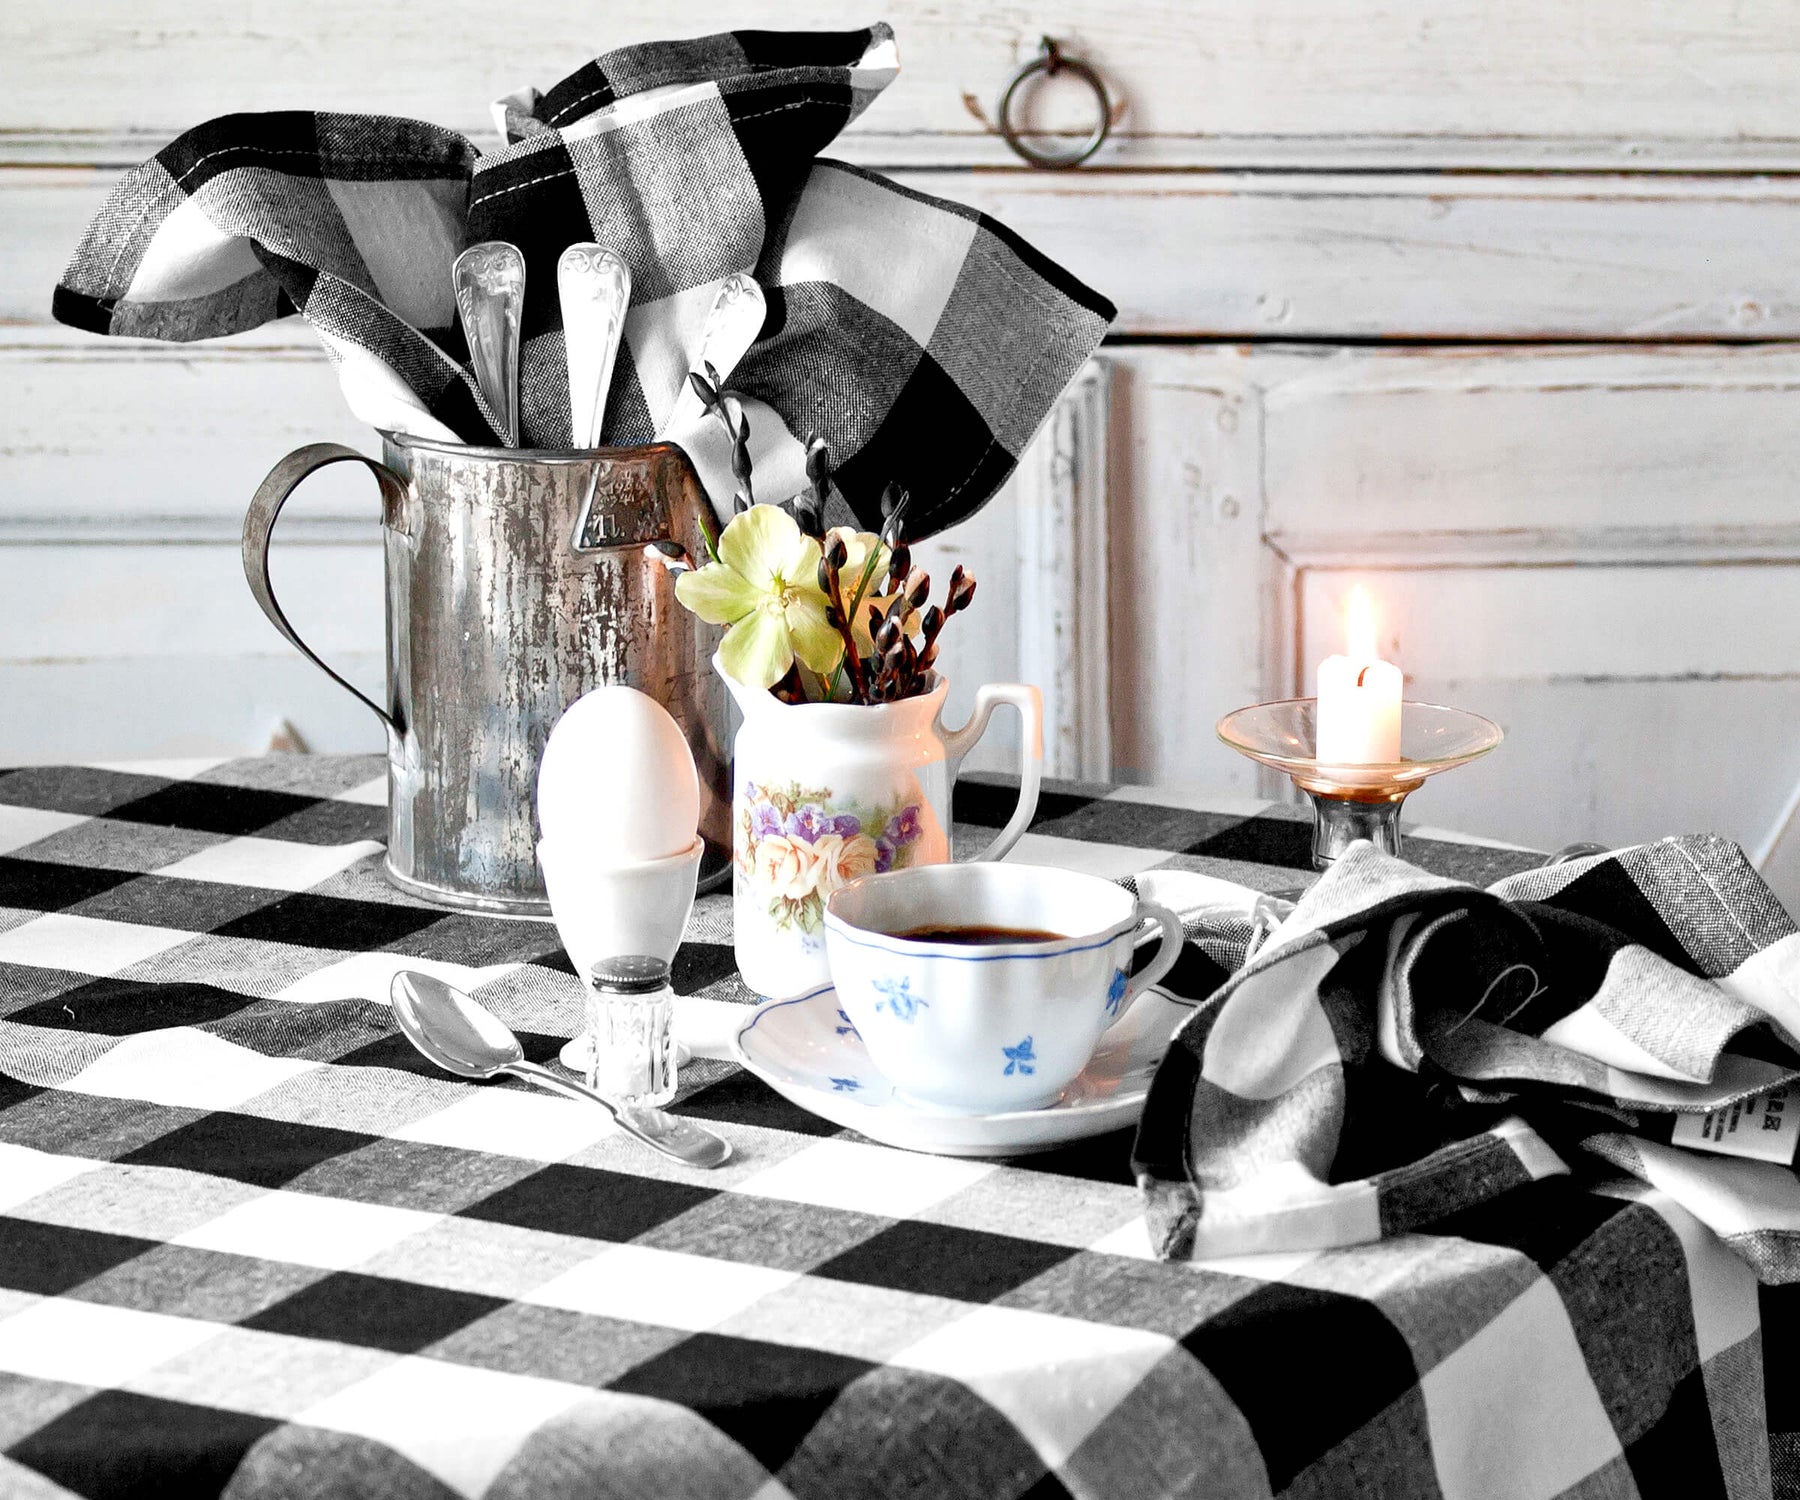 Round tablecloths, Round tablecloths, Heavy cotton tablecloths, black cotton tablecloths, Round cotton tablecloths. linen tablecloth, round plaid tablecloth